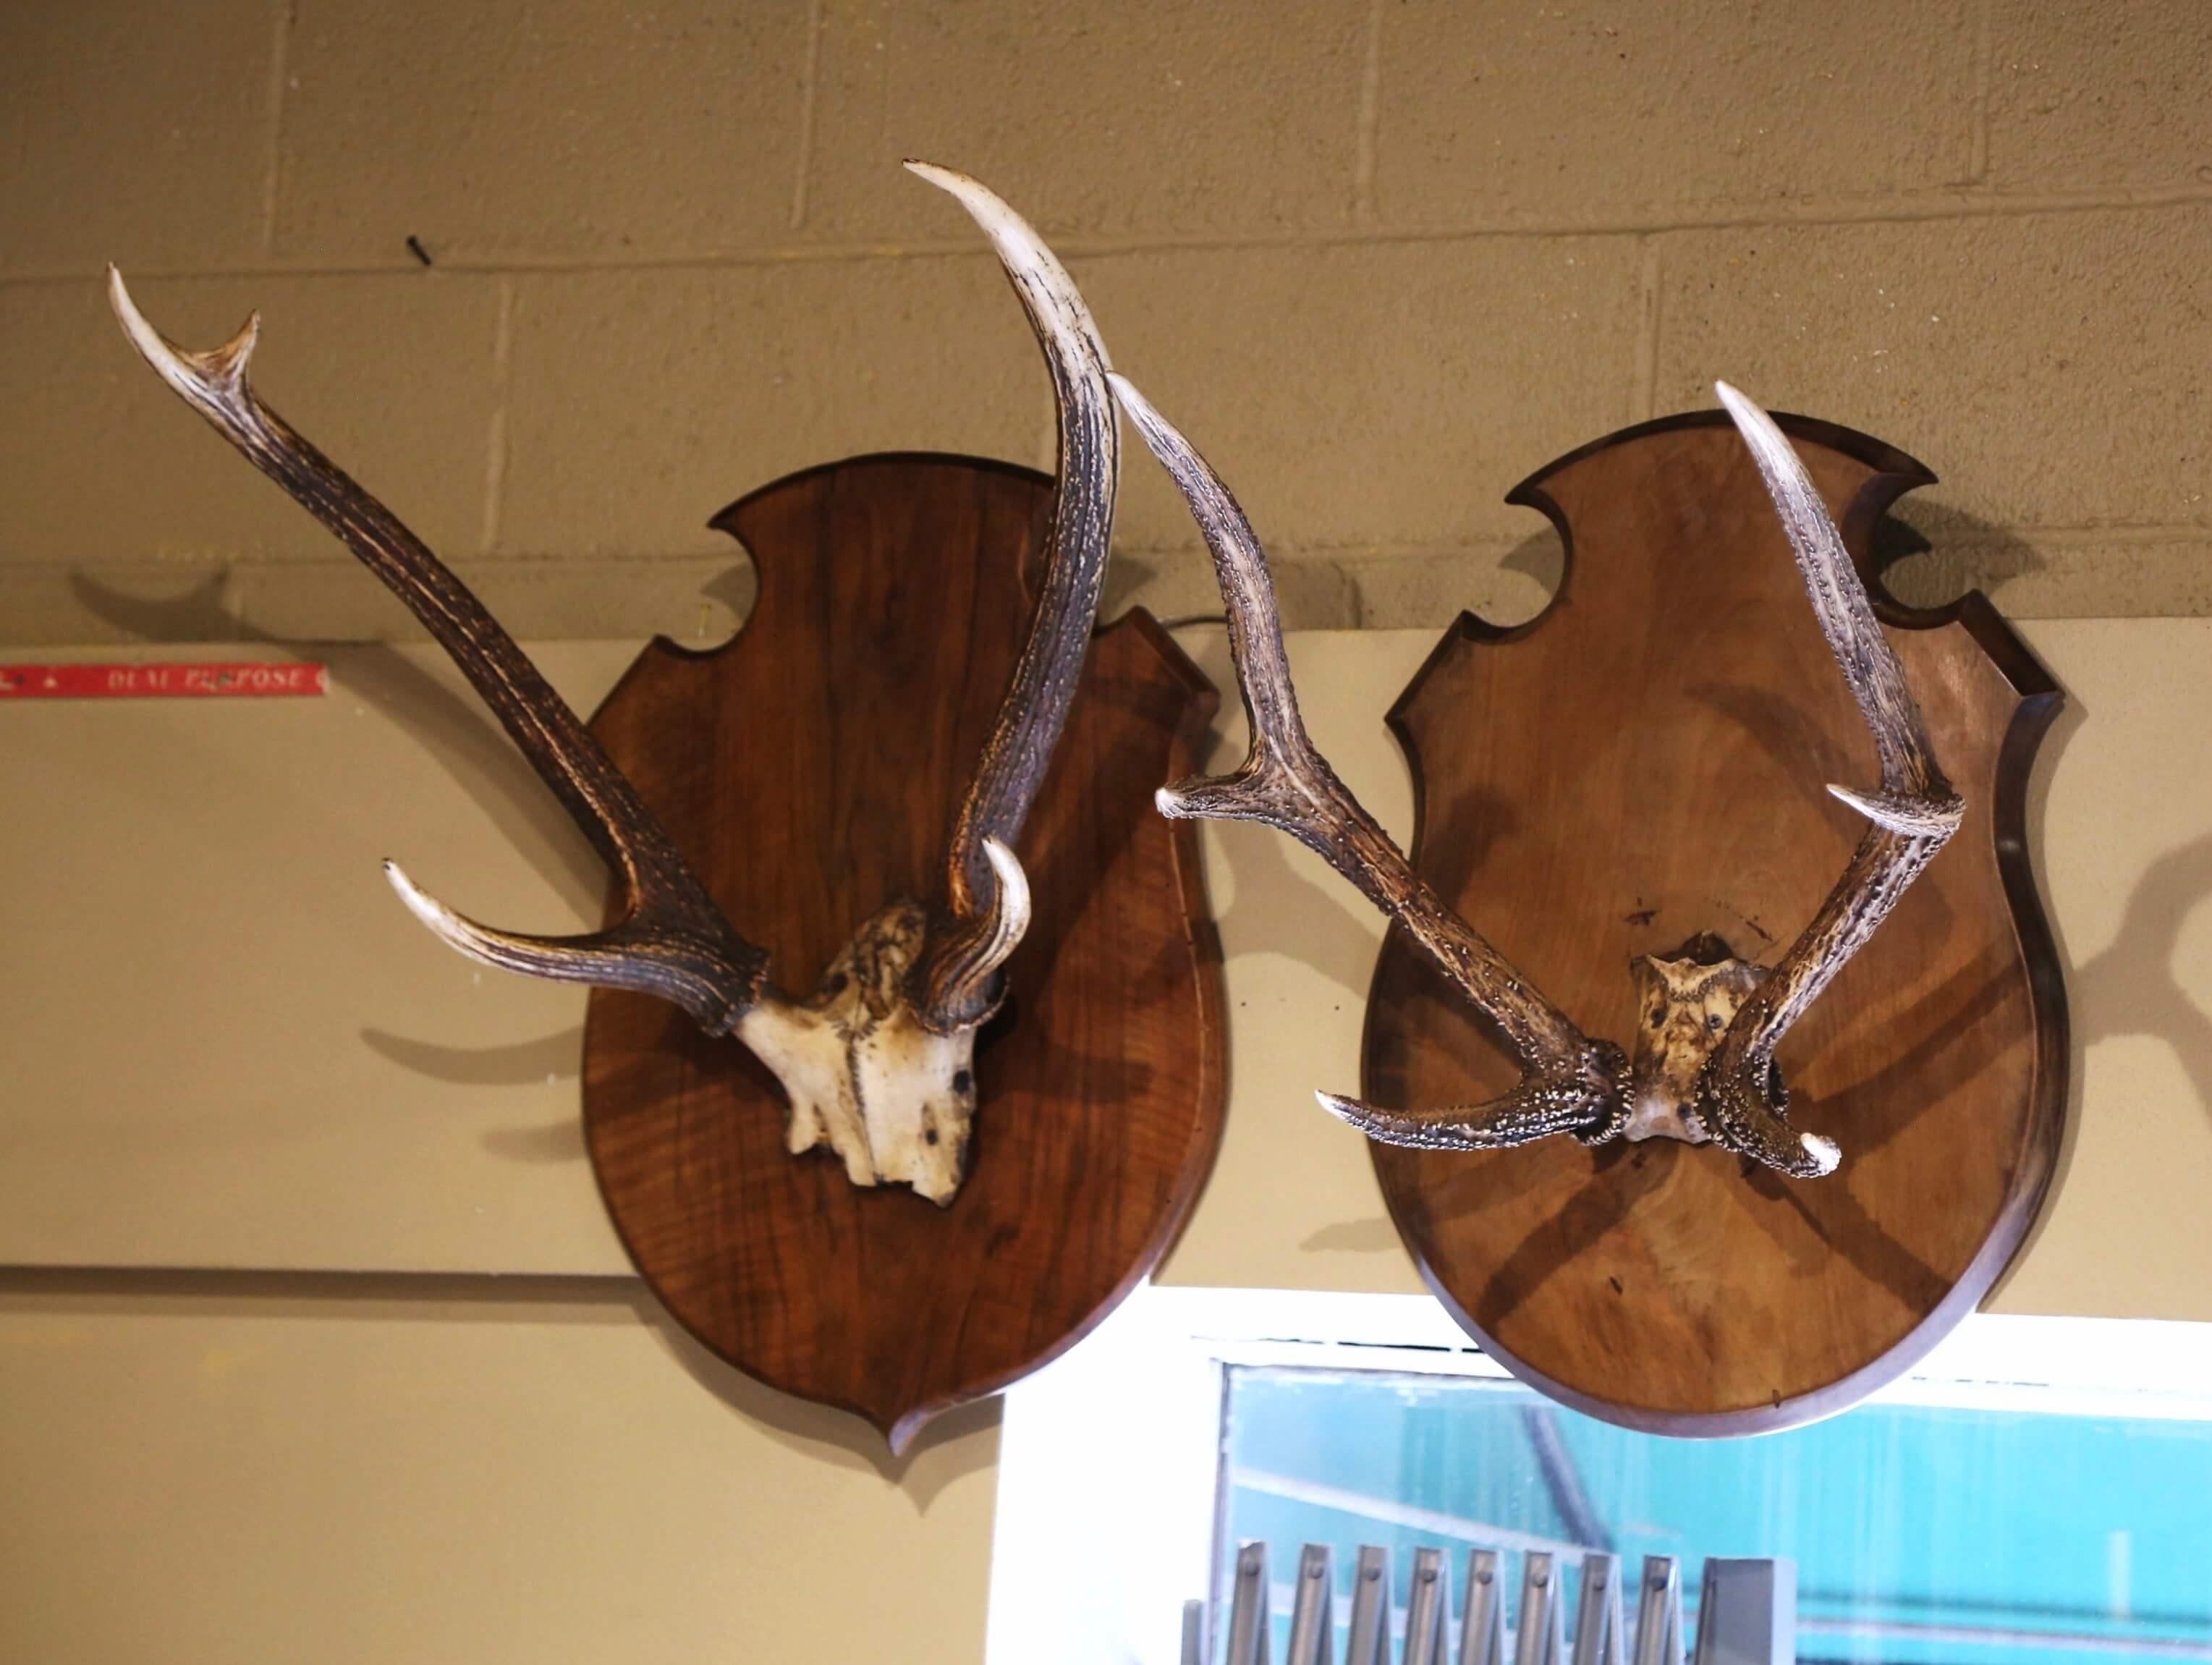 Create a rustic style in your home or ranch house with this pair of wall-mounted deer antler plaques. Bought in the Loire Valley of France, each large six-pointer deer trophy features a thick girth and is mounted on a carved, walnut plaque. The